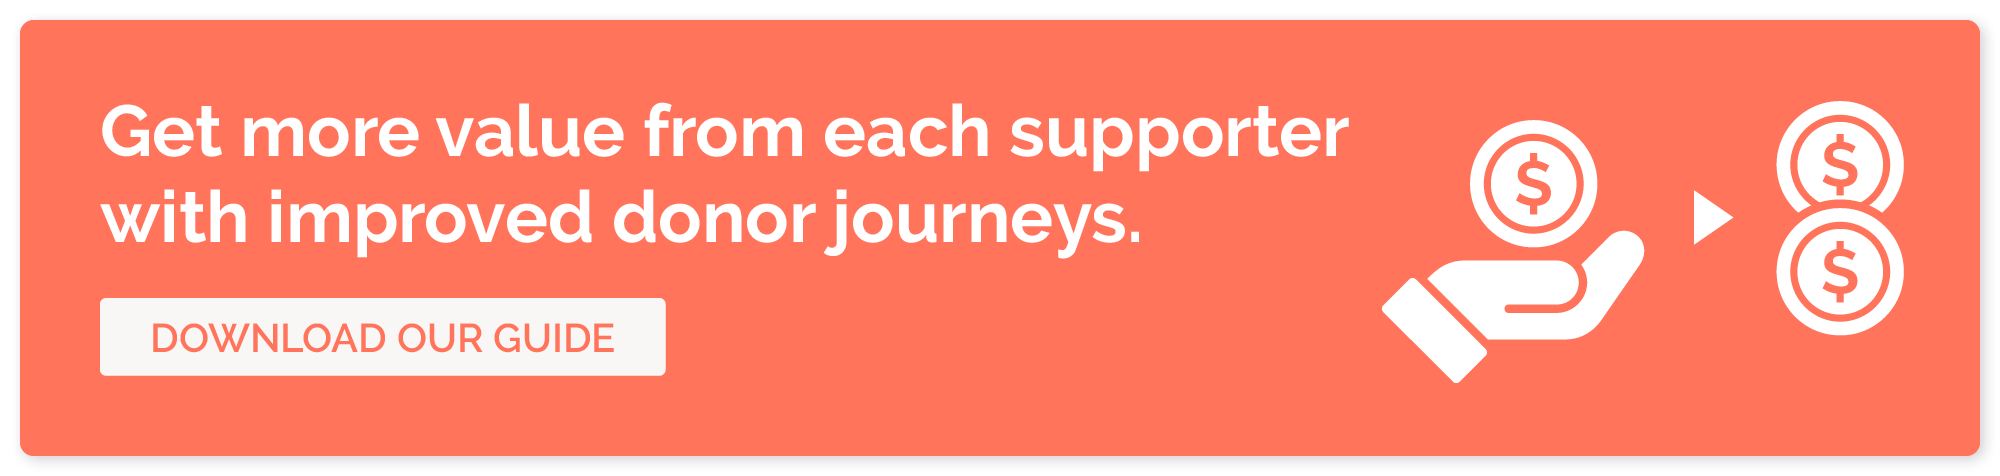 Get more value from each supporter with improved donor journeys. Download our guide.